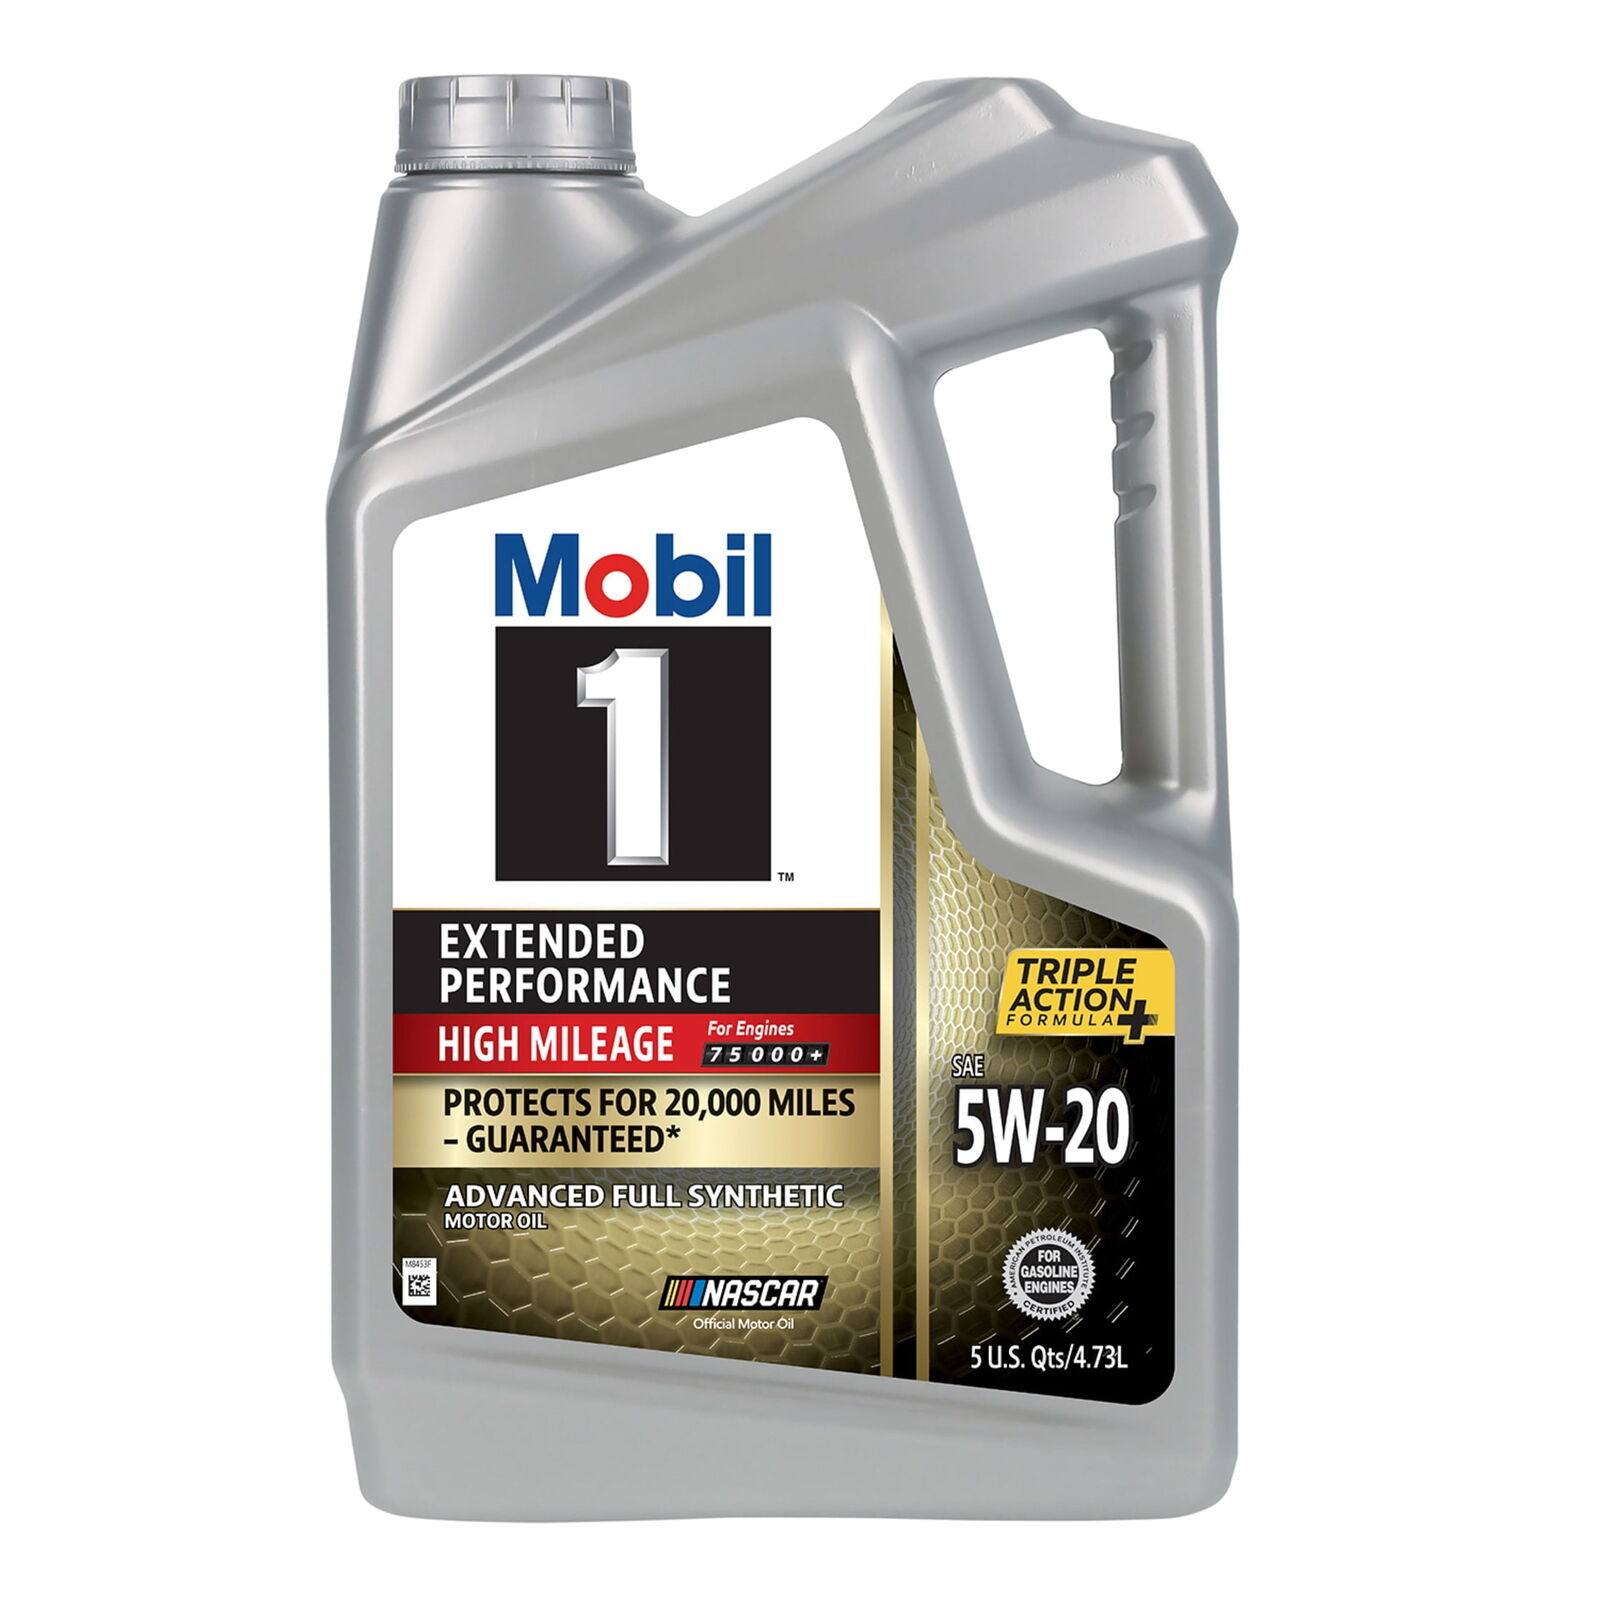 Mobil 1 Extended Performance High Mileage Full Synthetic Motor Oil 5W-20